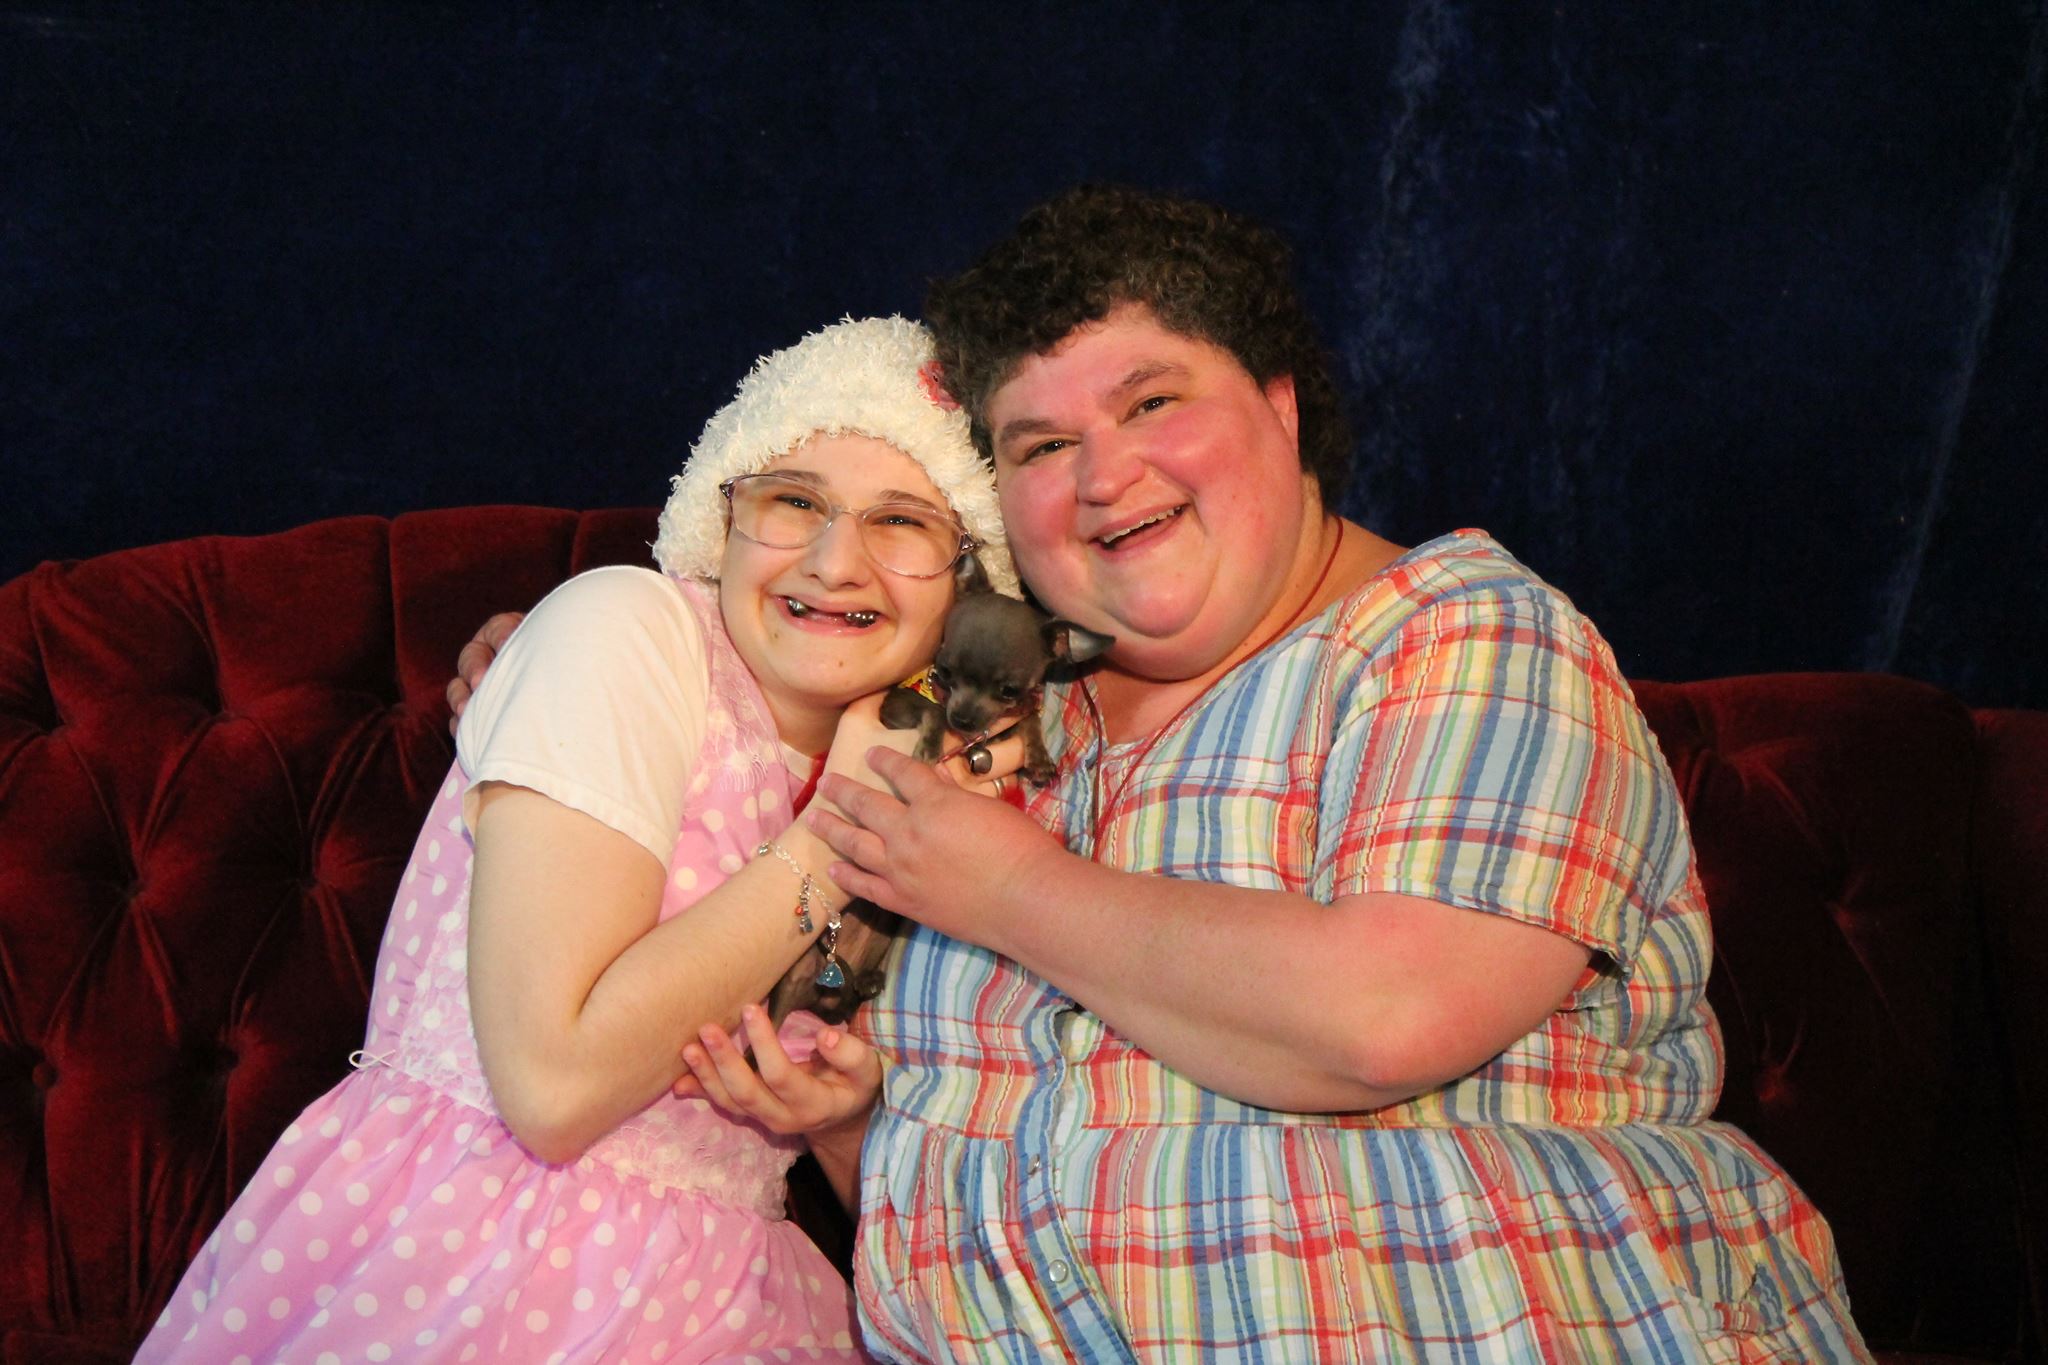 PHOTO: By the time she was 8 years old, Gypsy Blanchard, pictured here with her mother Dee Dee Blanchard.